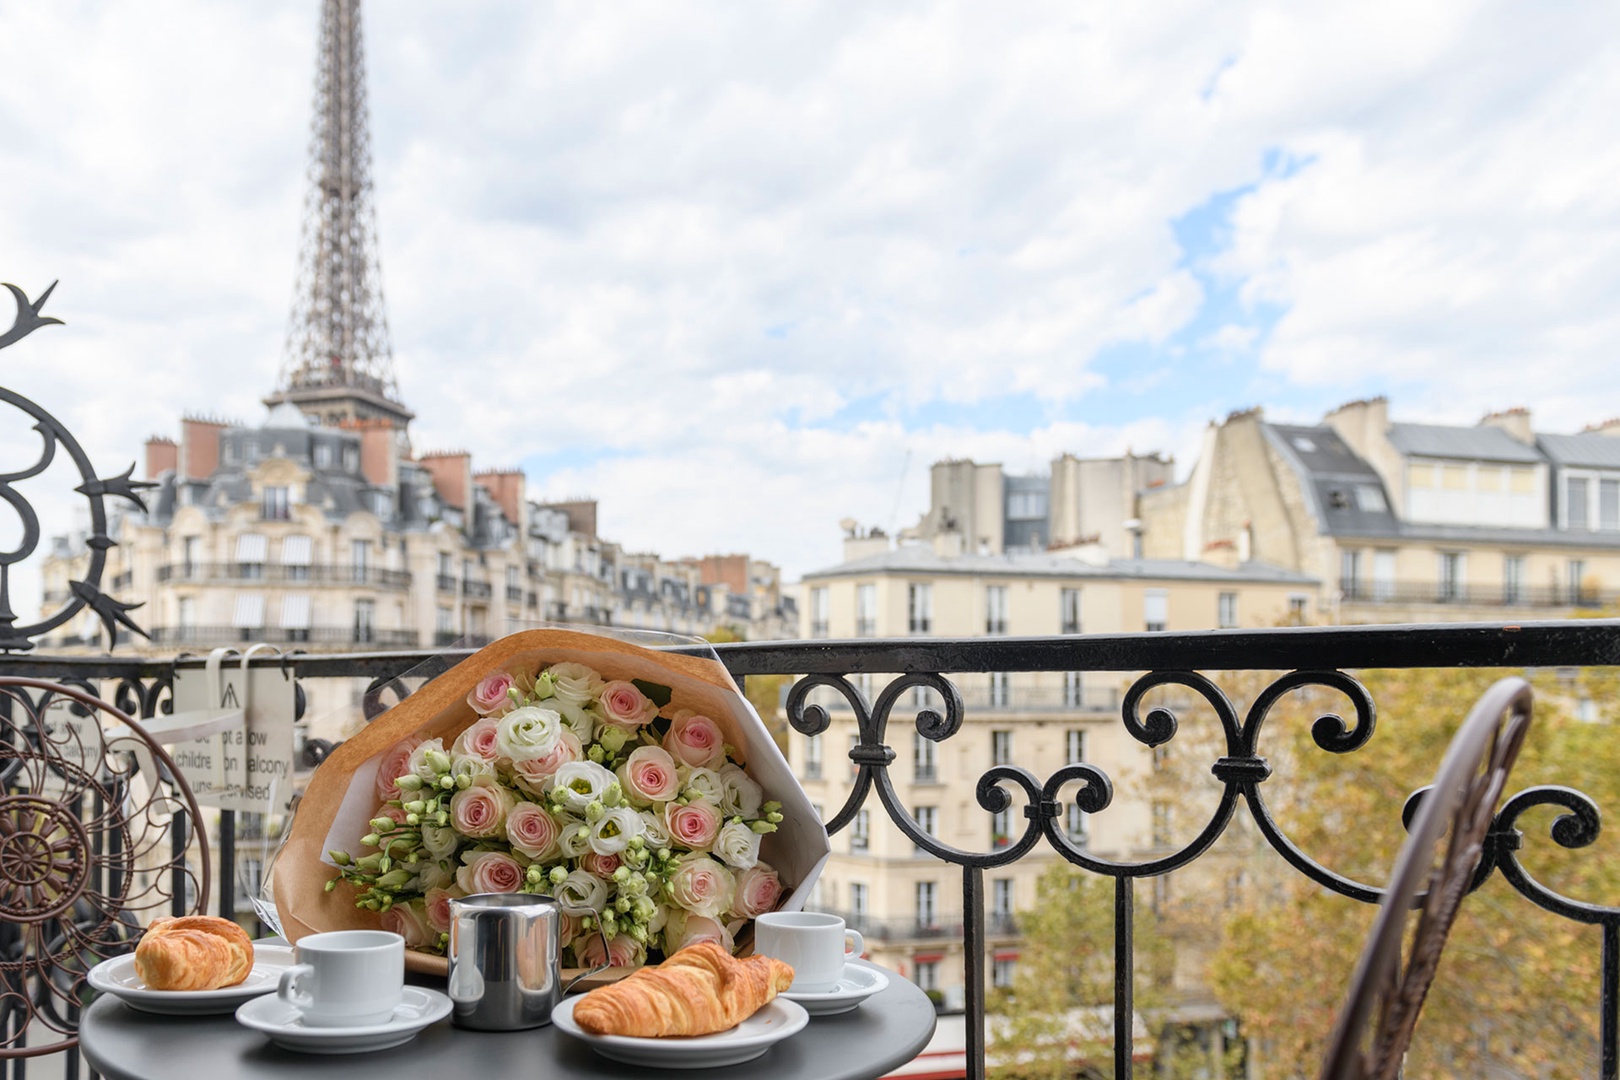 Have an al fresco breakfast on your balcony with stunning Eiffel Tower views!